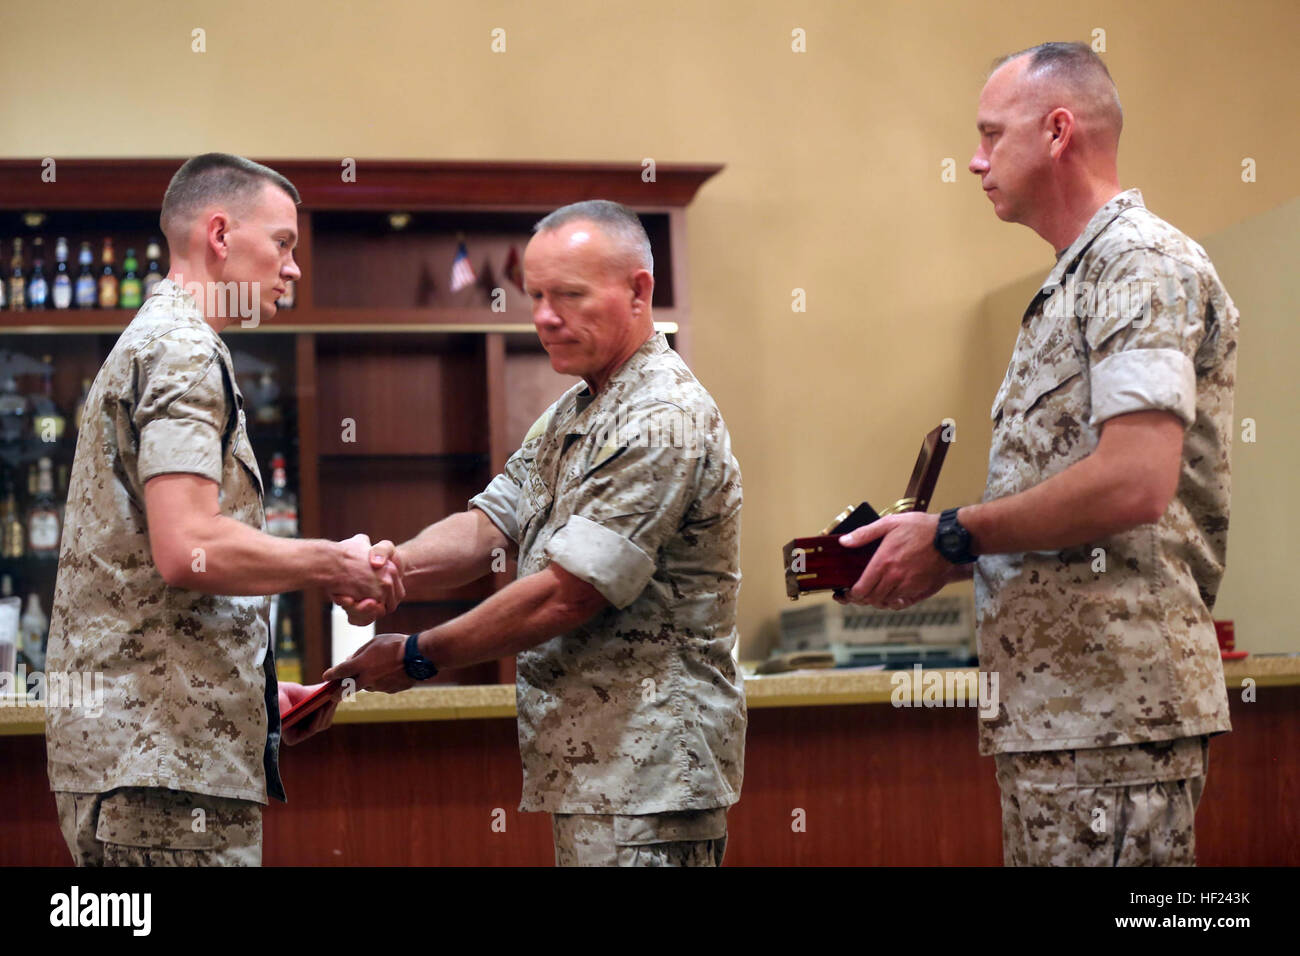 Major Gen. Lawrence D. Nicholson, center, the commanding general of 1st Marine Division, awards Cpl. Jager Hibler, left, a motor transportation operator with 3rd Combat Engineer Battalion, the 2013 Marine Corps Motor Transport Association’s Operator of the Year award during an award ceremony aboard Marine Corps Base Camp Pendleton, Calif., April 30, 2014. Hibler, a 22-year-old native of Alamogordo, N.M., has traveled 1,500 miles throughout combat zones in Helmand province, Afghanistan, where he transported personnel and key equipment across his area of operations. 1st MarDiv motor transportati Stock Photo